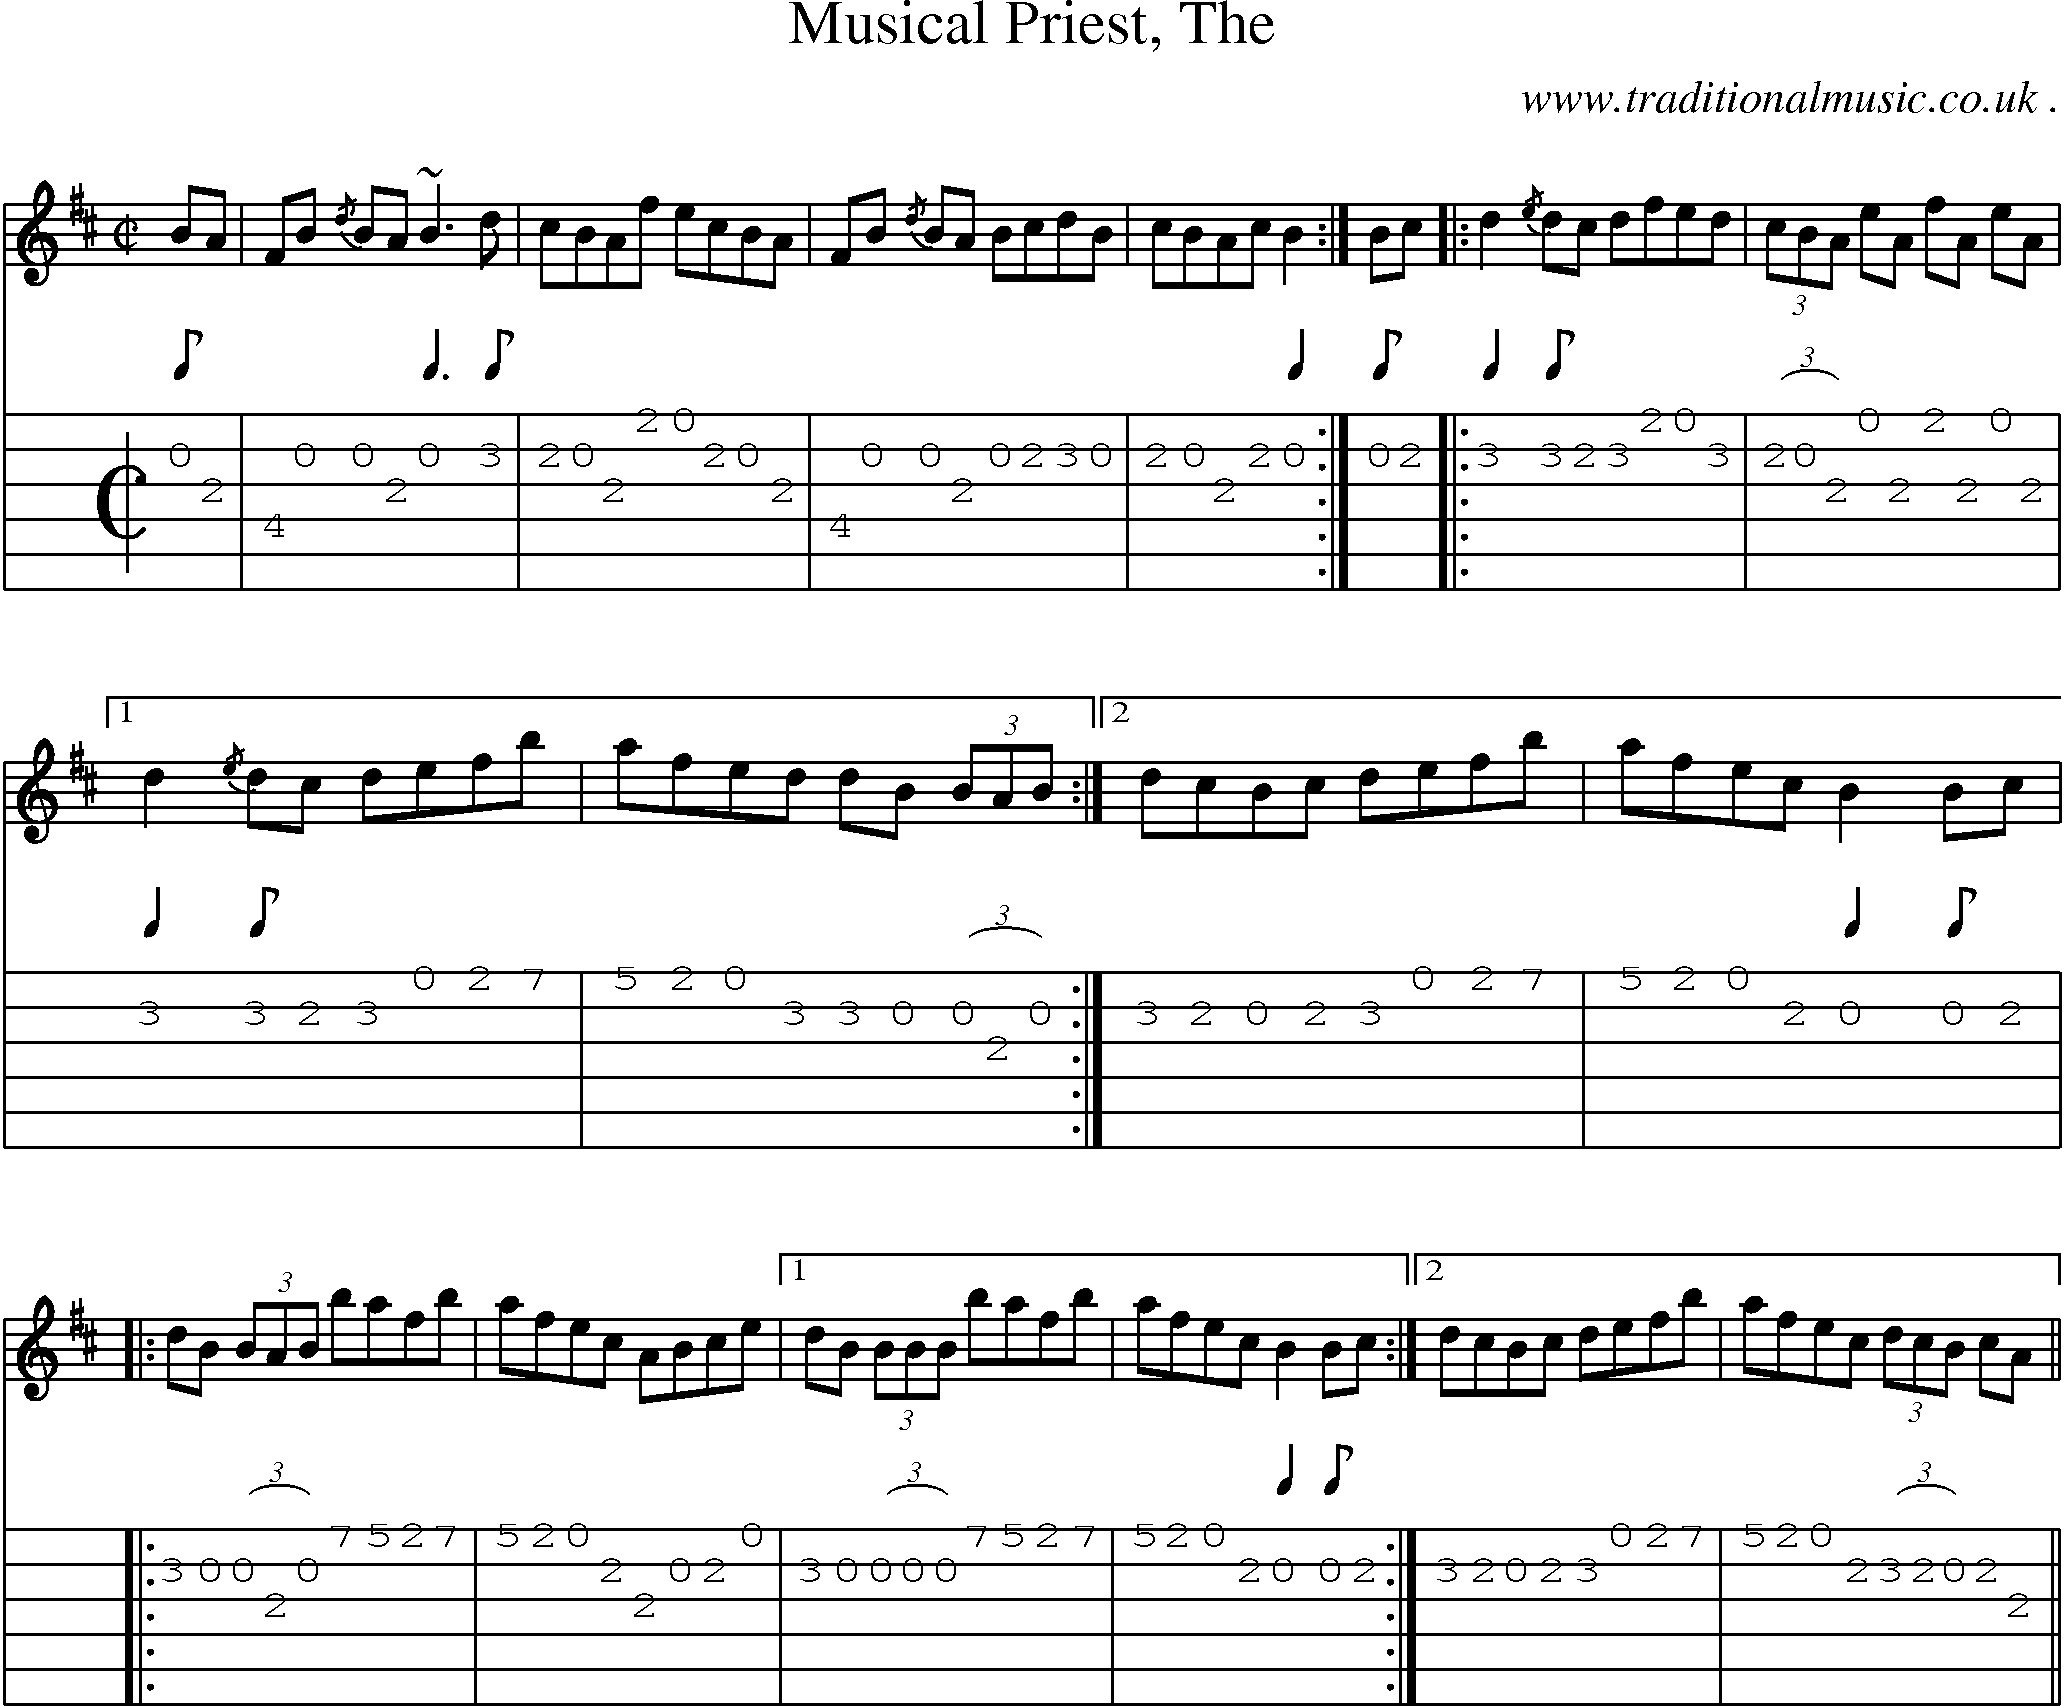 Sheet-music  score, Chords and Guitar Tabs for Musical Priest The